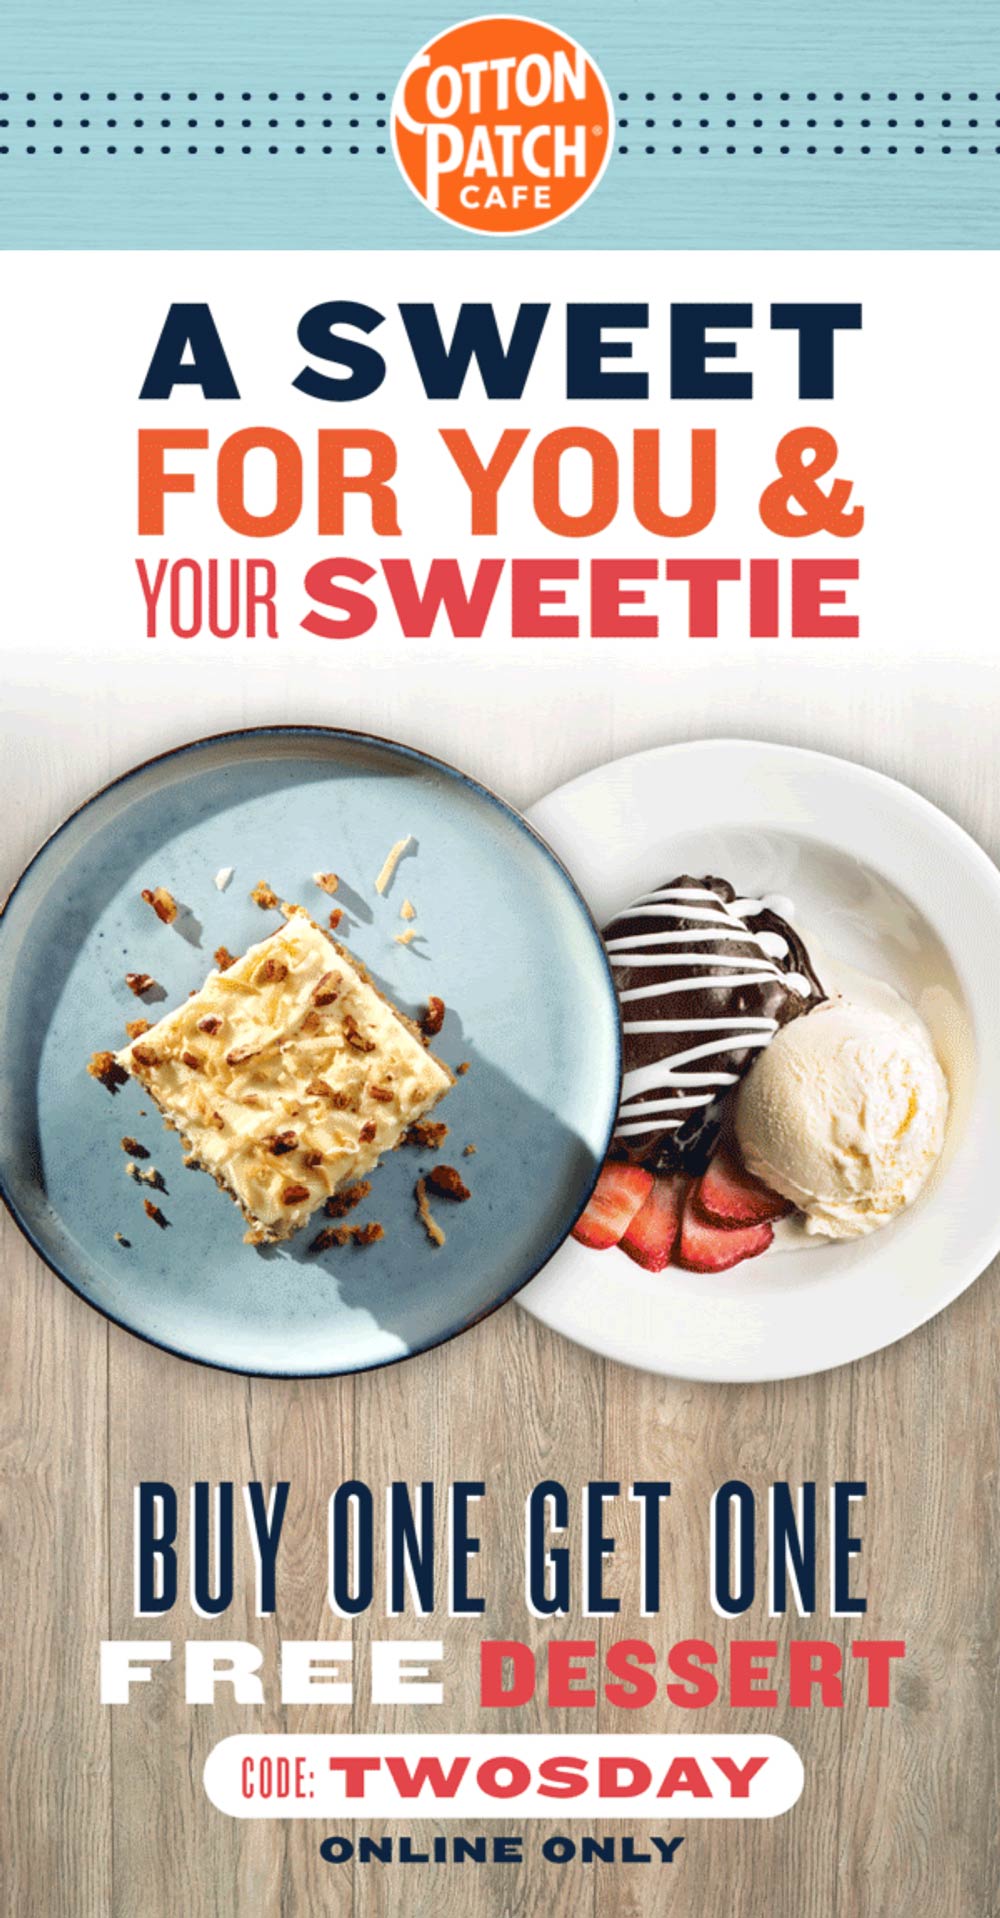 Cotton Patch Cafe restaurants Coupon  Second dessert free today at Cotton Patch Cafe via promo code TWOSDAY #cottonpatchcafe 